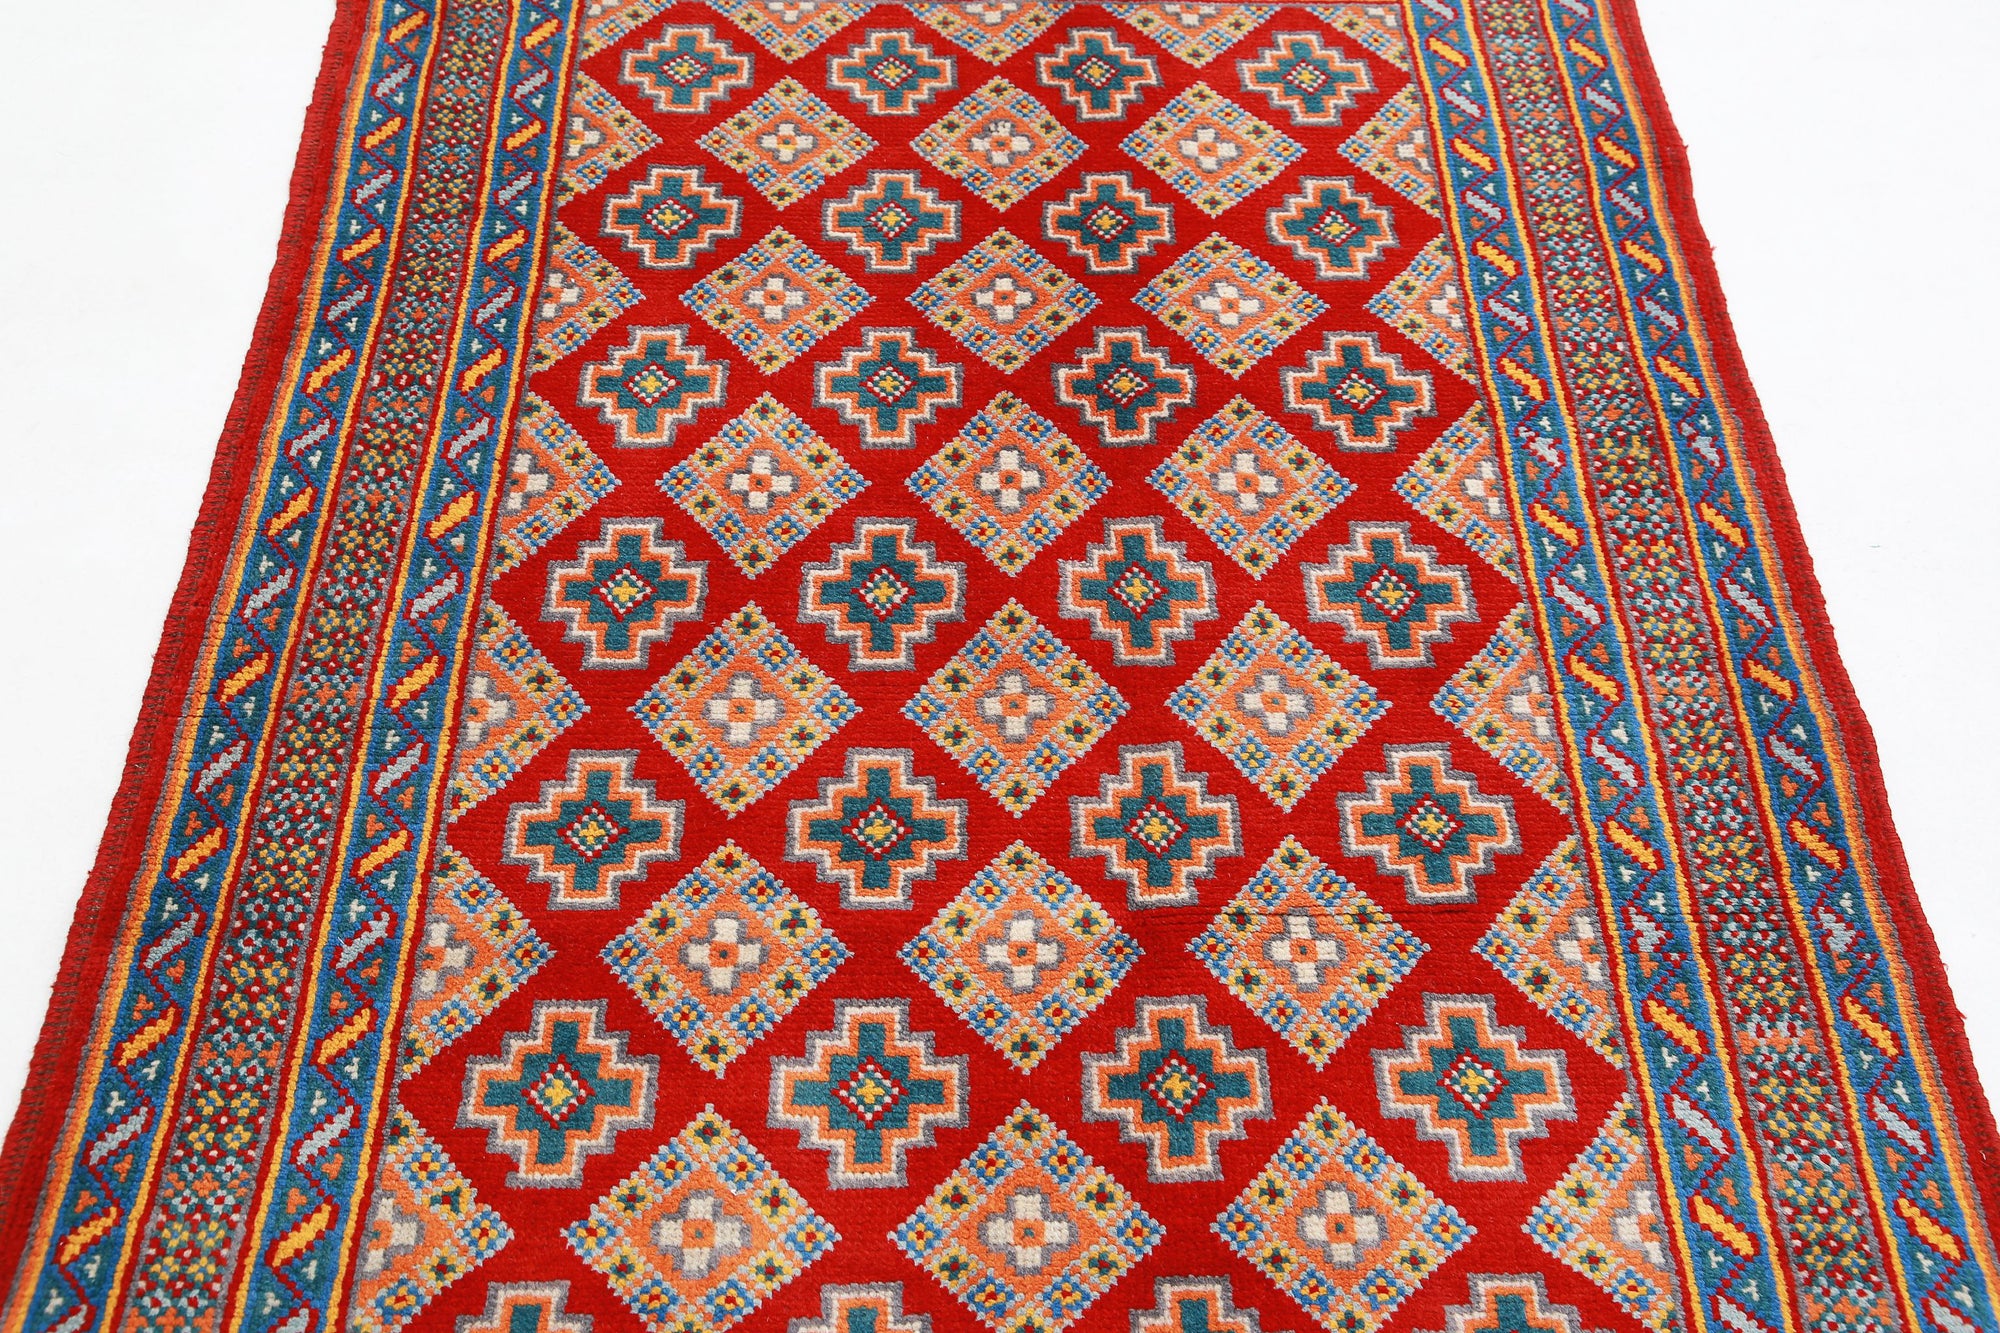 Revival-hand-knotted-qarghani-wool-rug-5014214-4.jpg